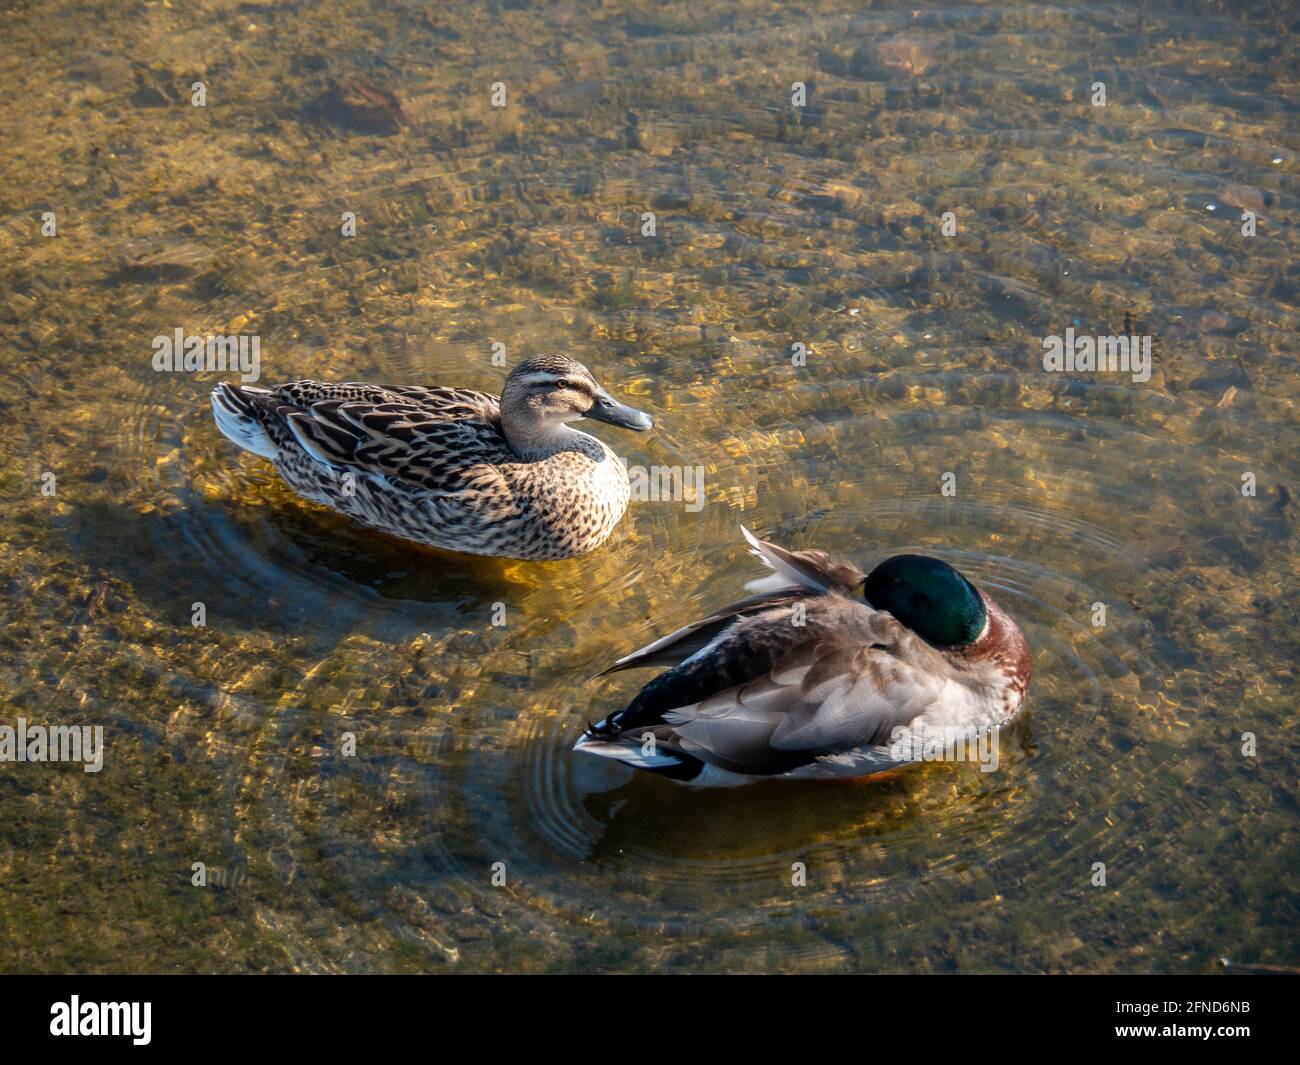 Wild ducks floating in the water, top view Stock Photo